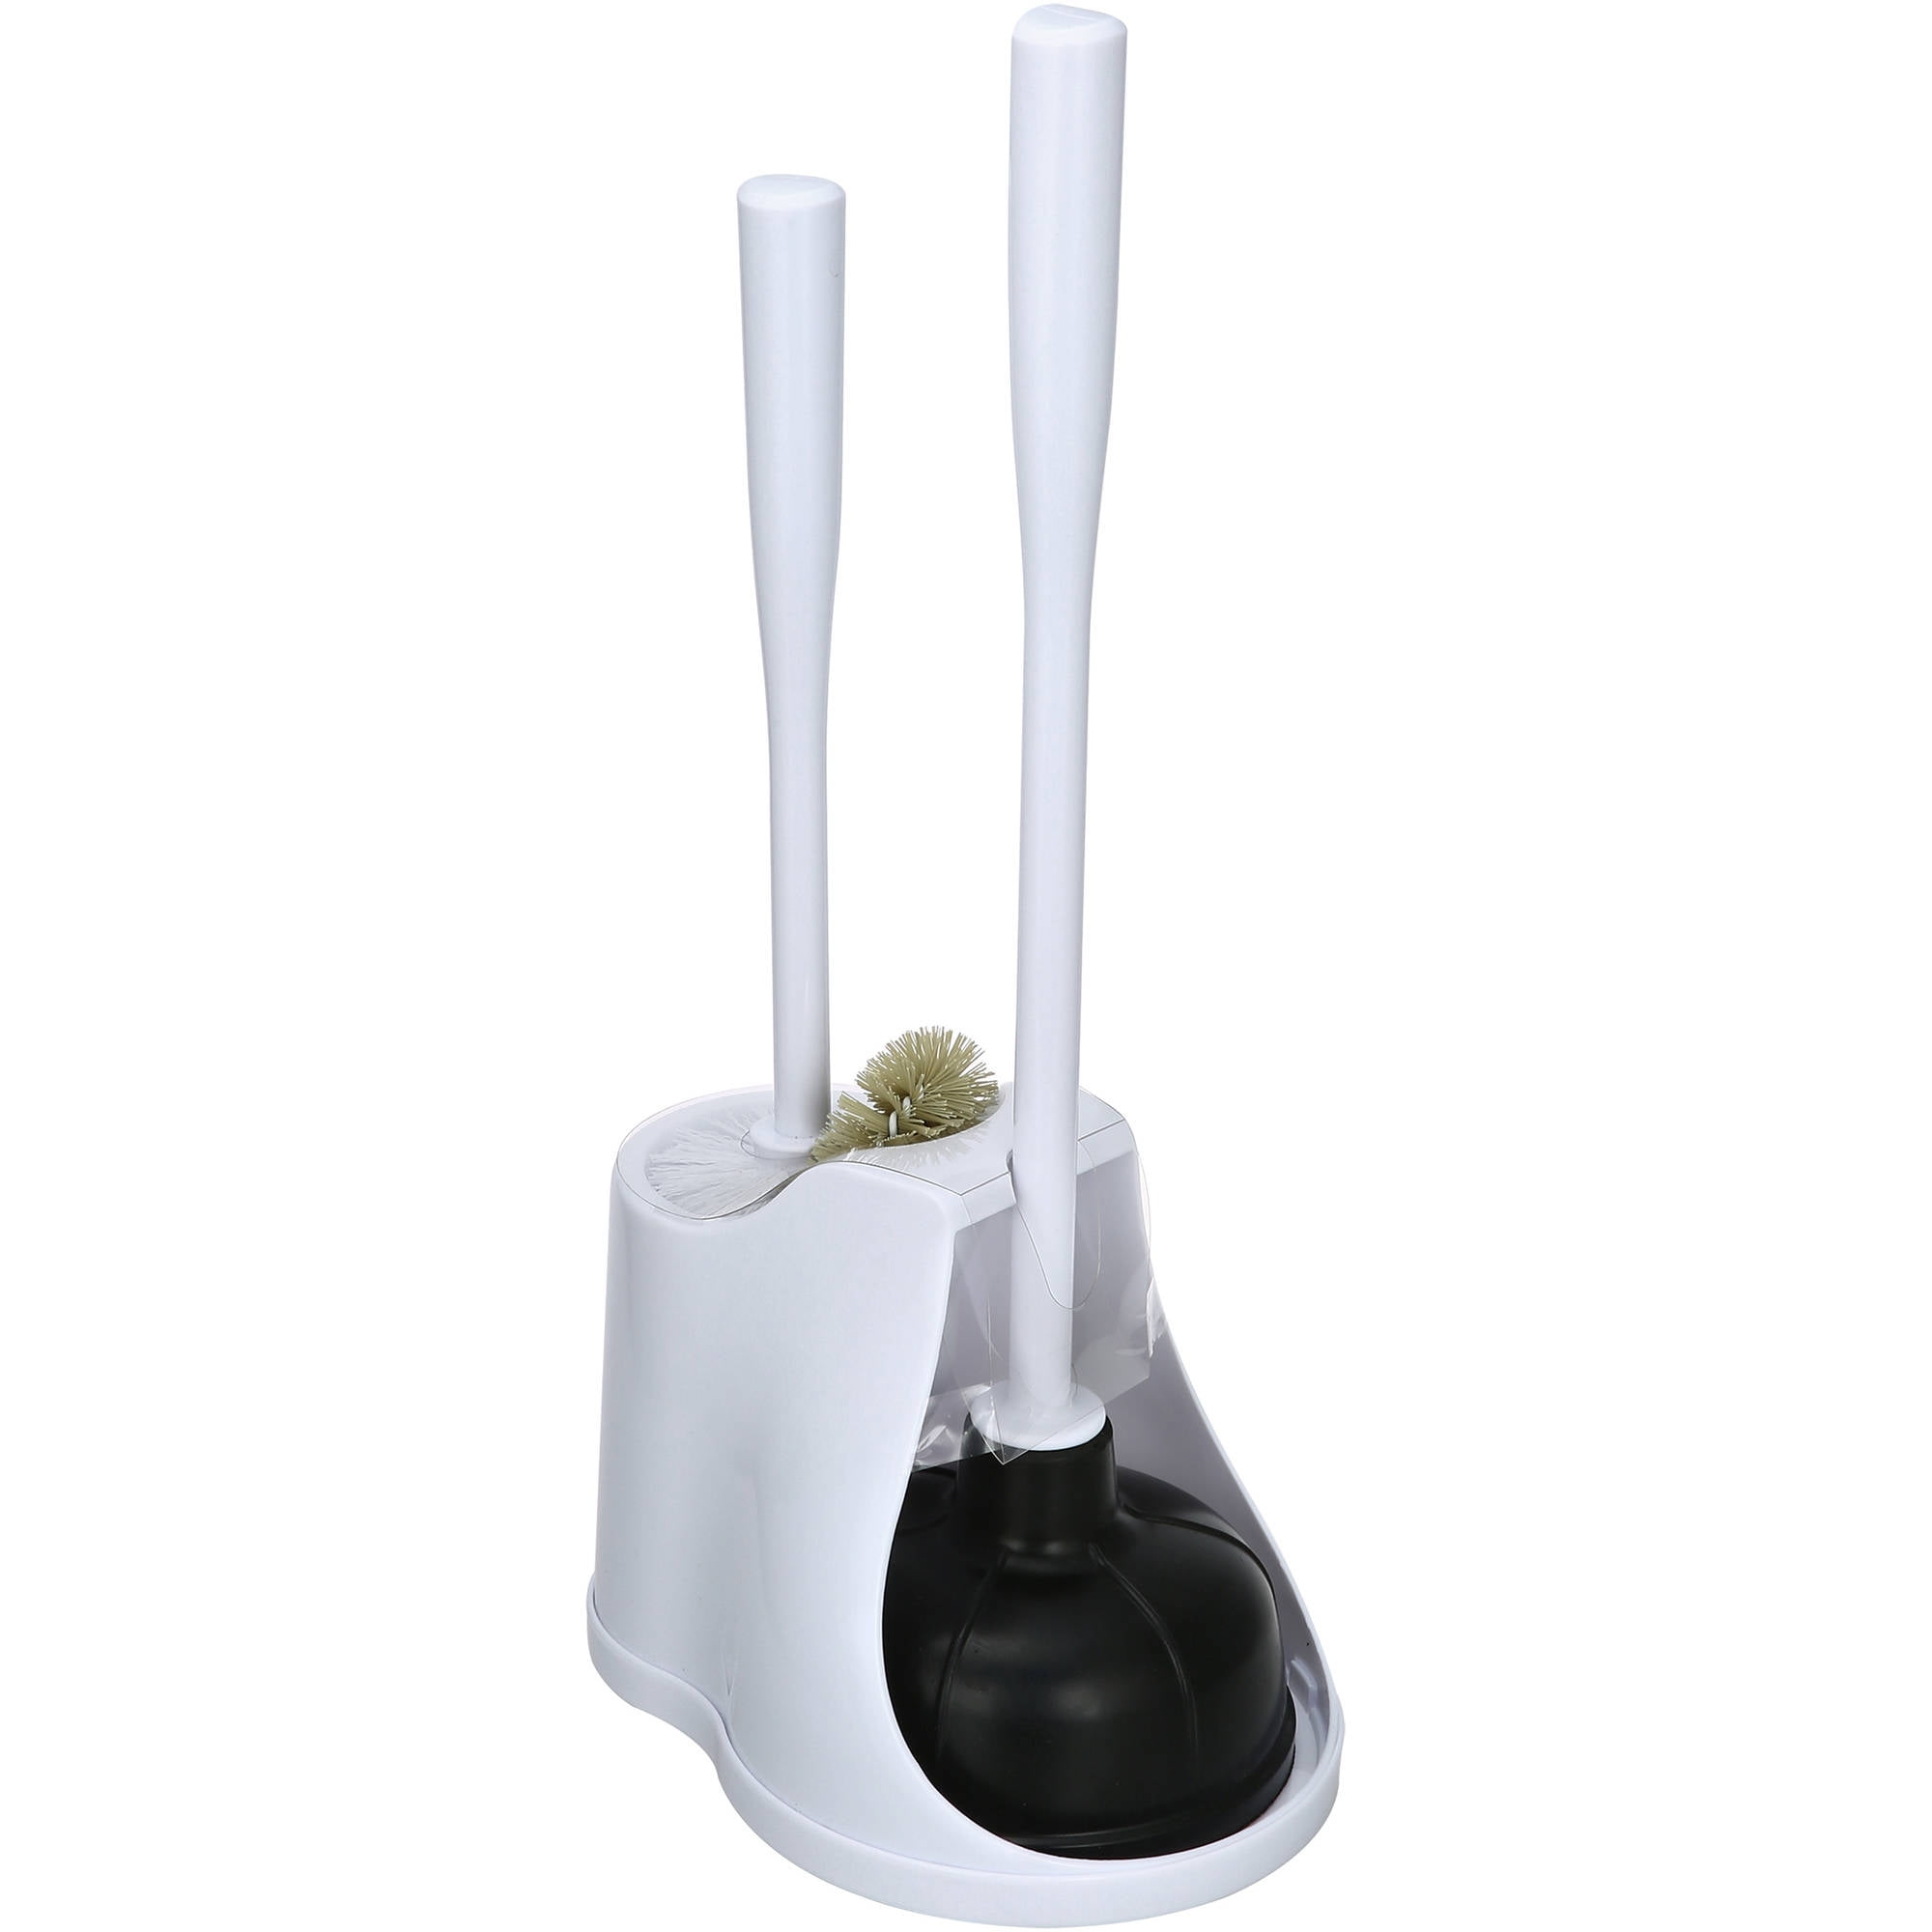 Toilet Plunger Wooden Handle Black Base Simple Durable Sturdy Bathroom Accessory 